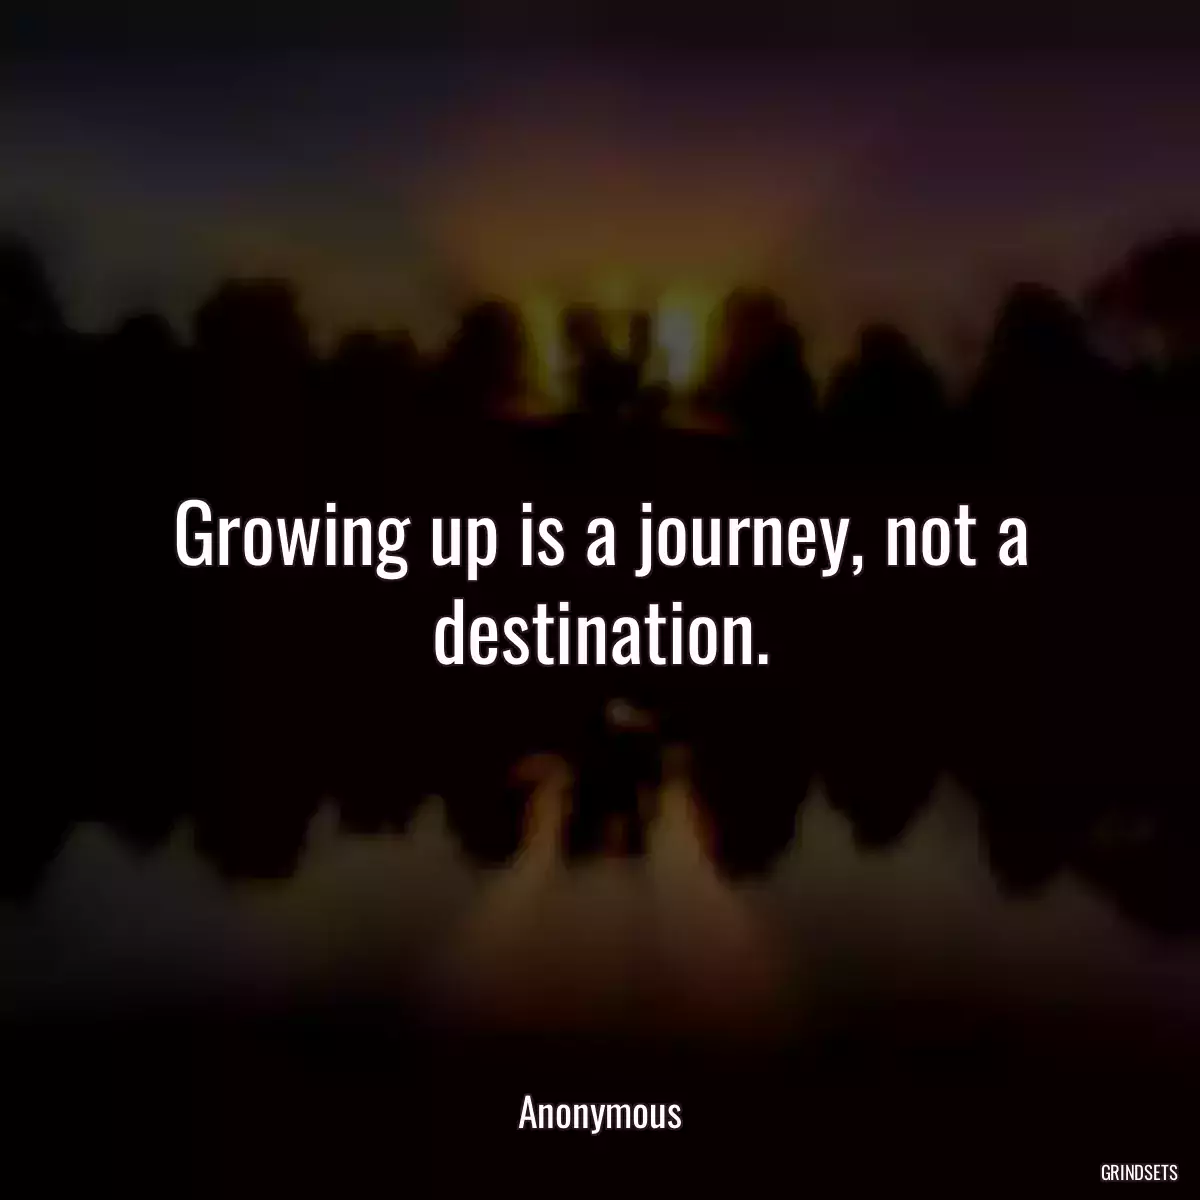 Growing up is a journey, not a destination.